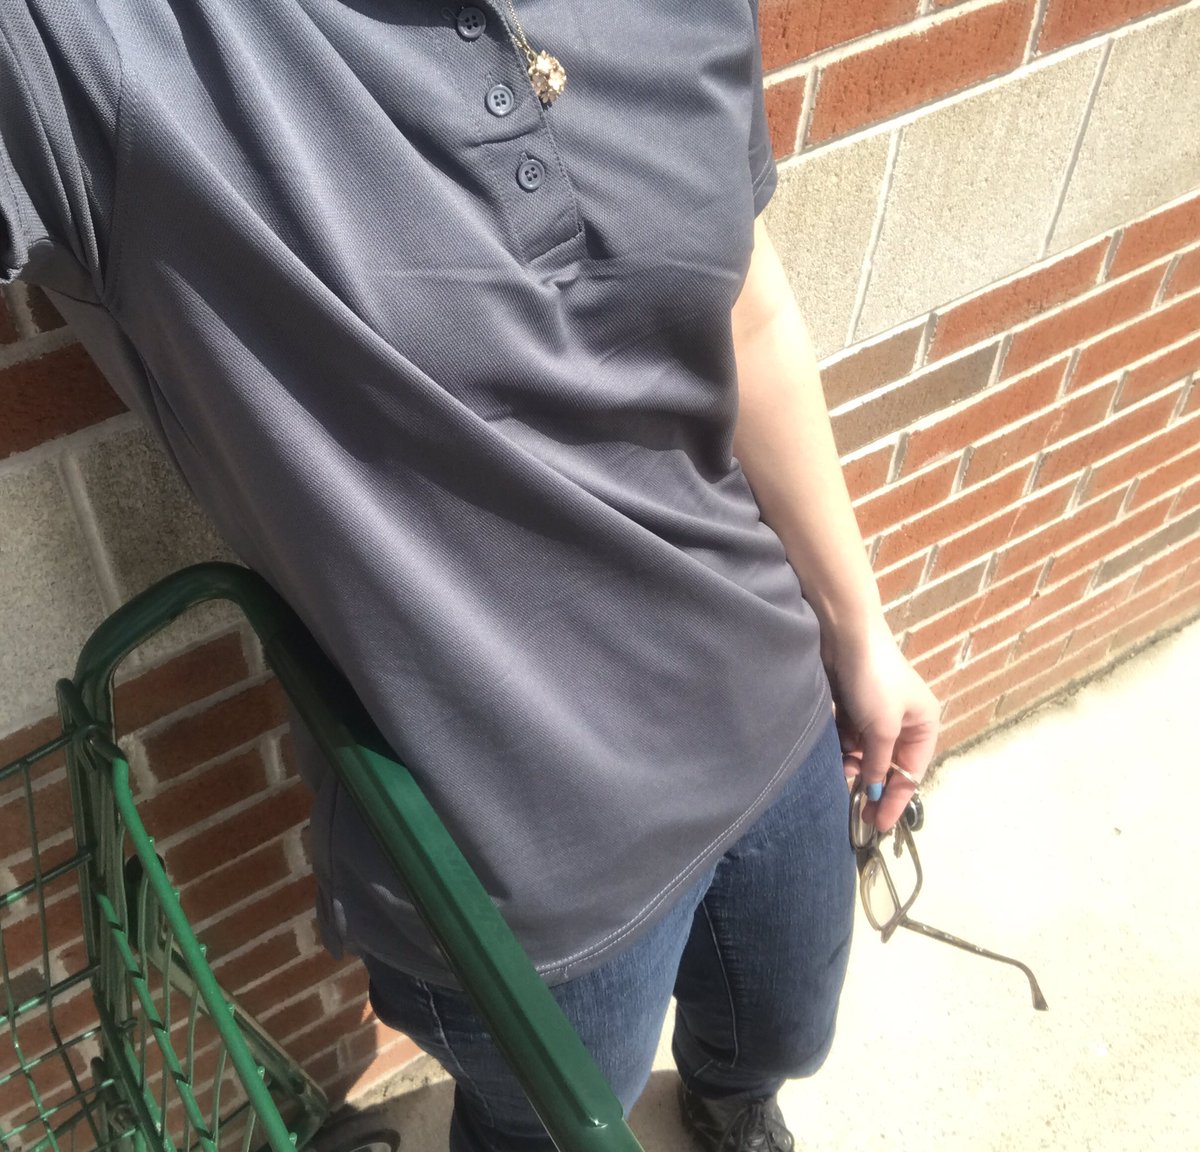  #SocialDistanceStyle Day 22: could the front lines be any less fashionable